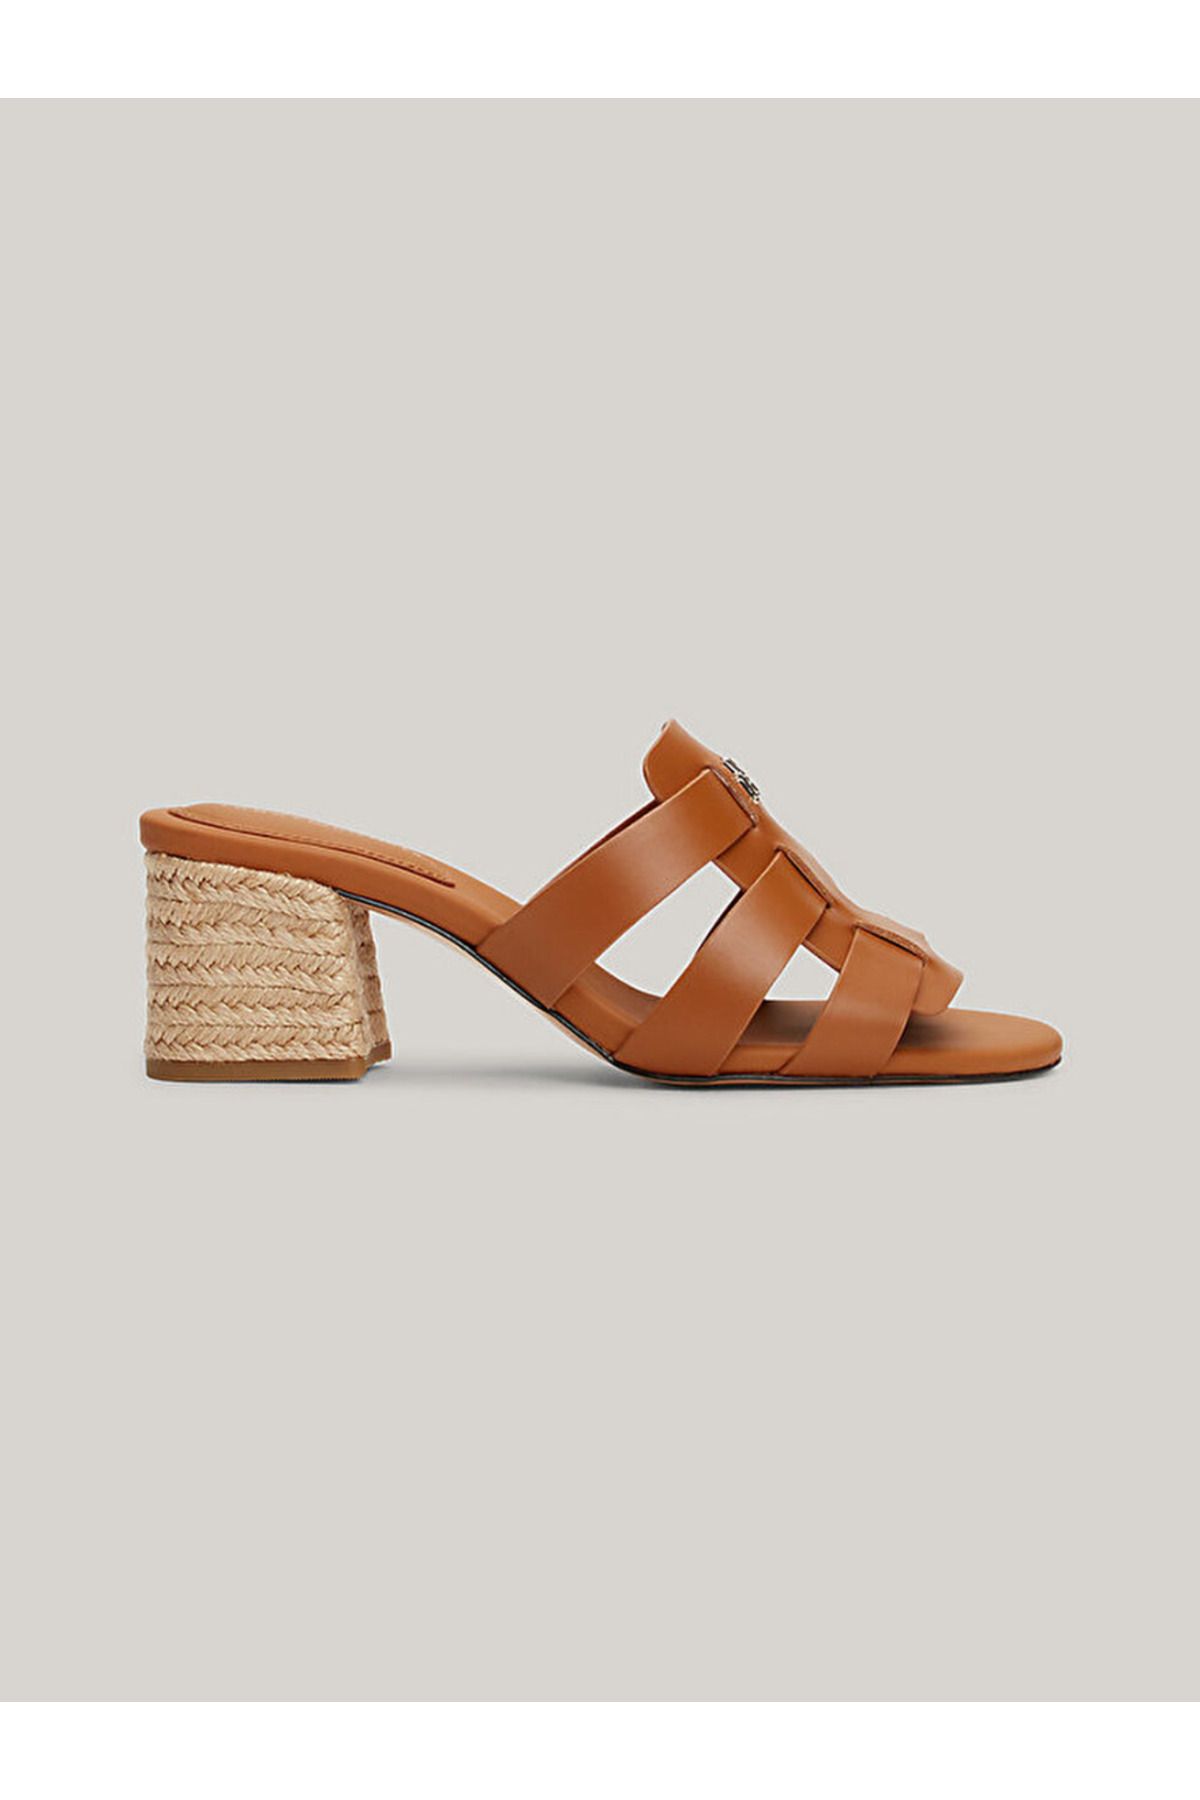 Tommy Hilfiger Rope Block Heel Cage Leather Sandals